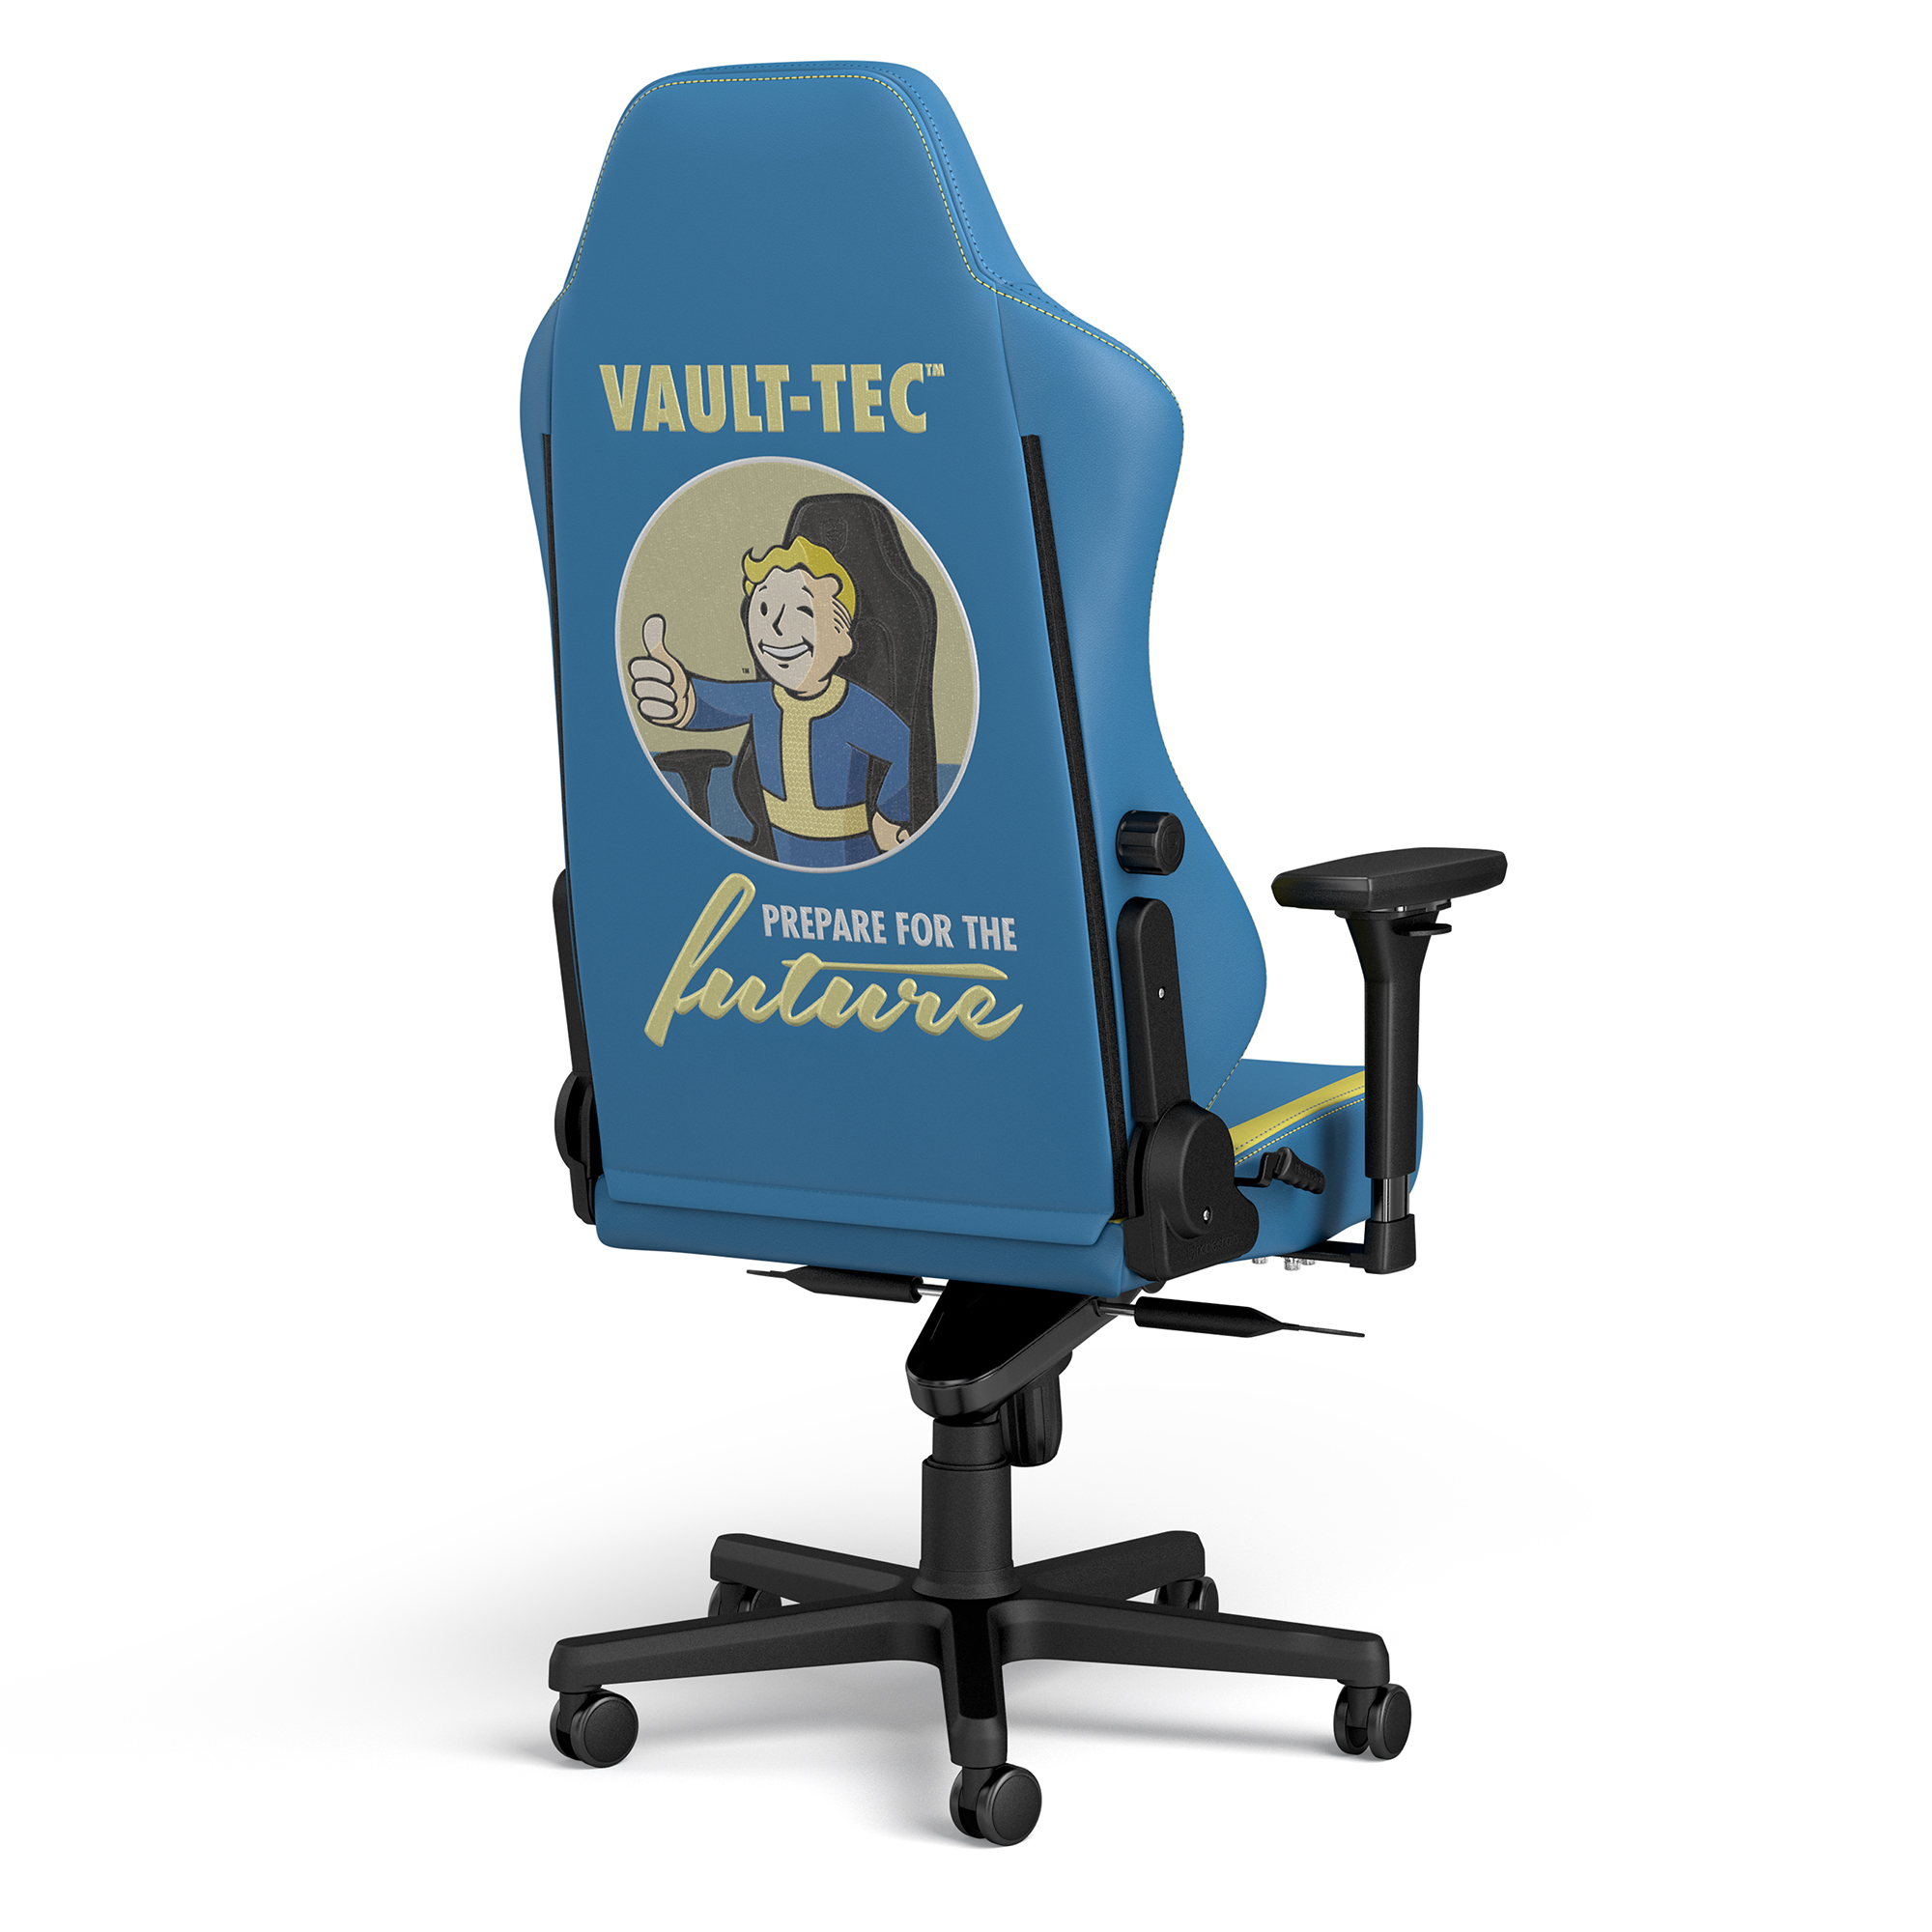 noblechairs - noblechairs HERO Gaming Chair - Fallout Vault-Tec Edition - Blue/Yellow